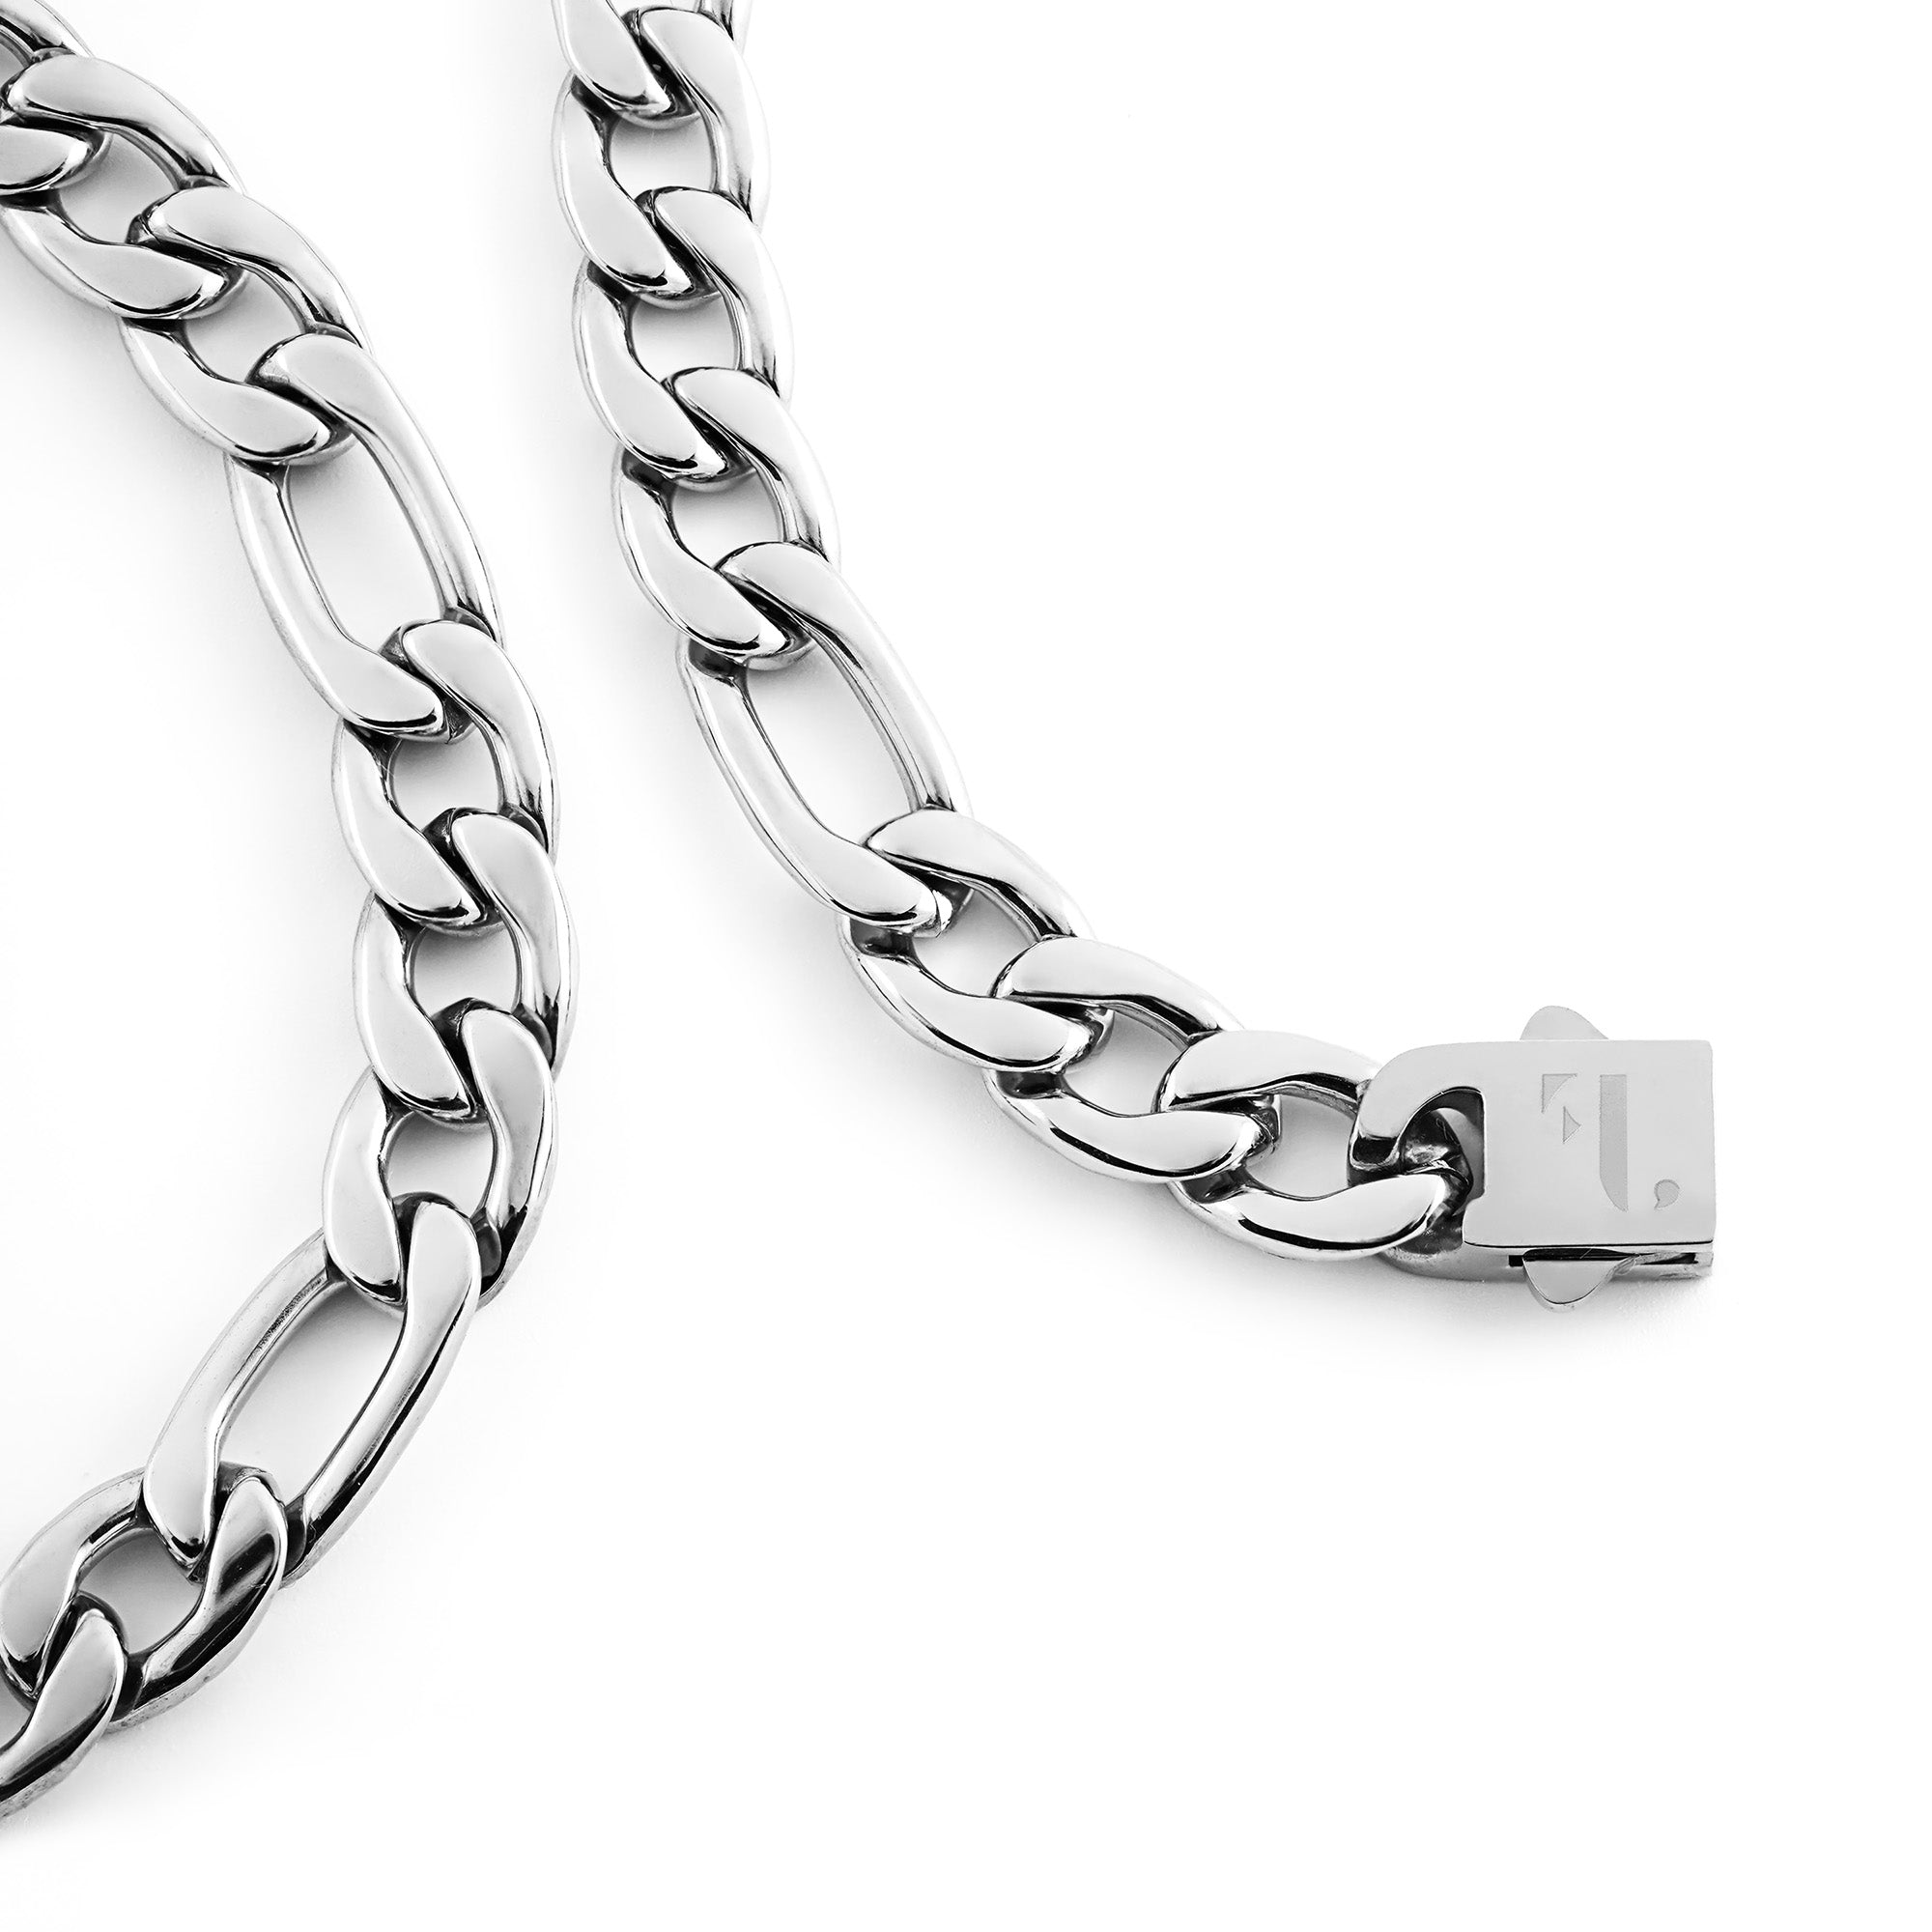 Berg men's necklace by Five Jwlry, featuring a bold 9mm smooth figaro chain in silver, made from water-resistant 316L stainless steel. Offered in sizes 45cm and 50cm. Hypoallergenic with a 2-year warranty.